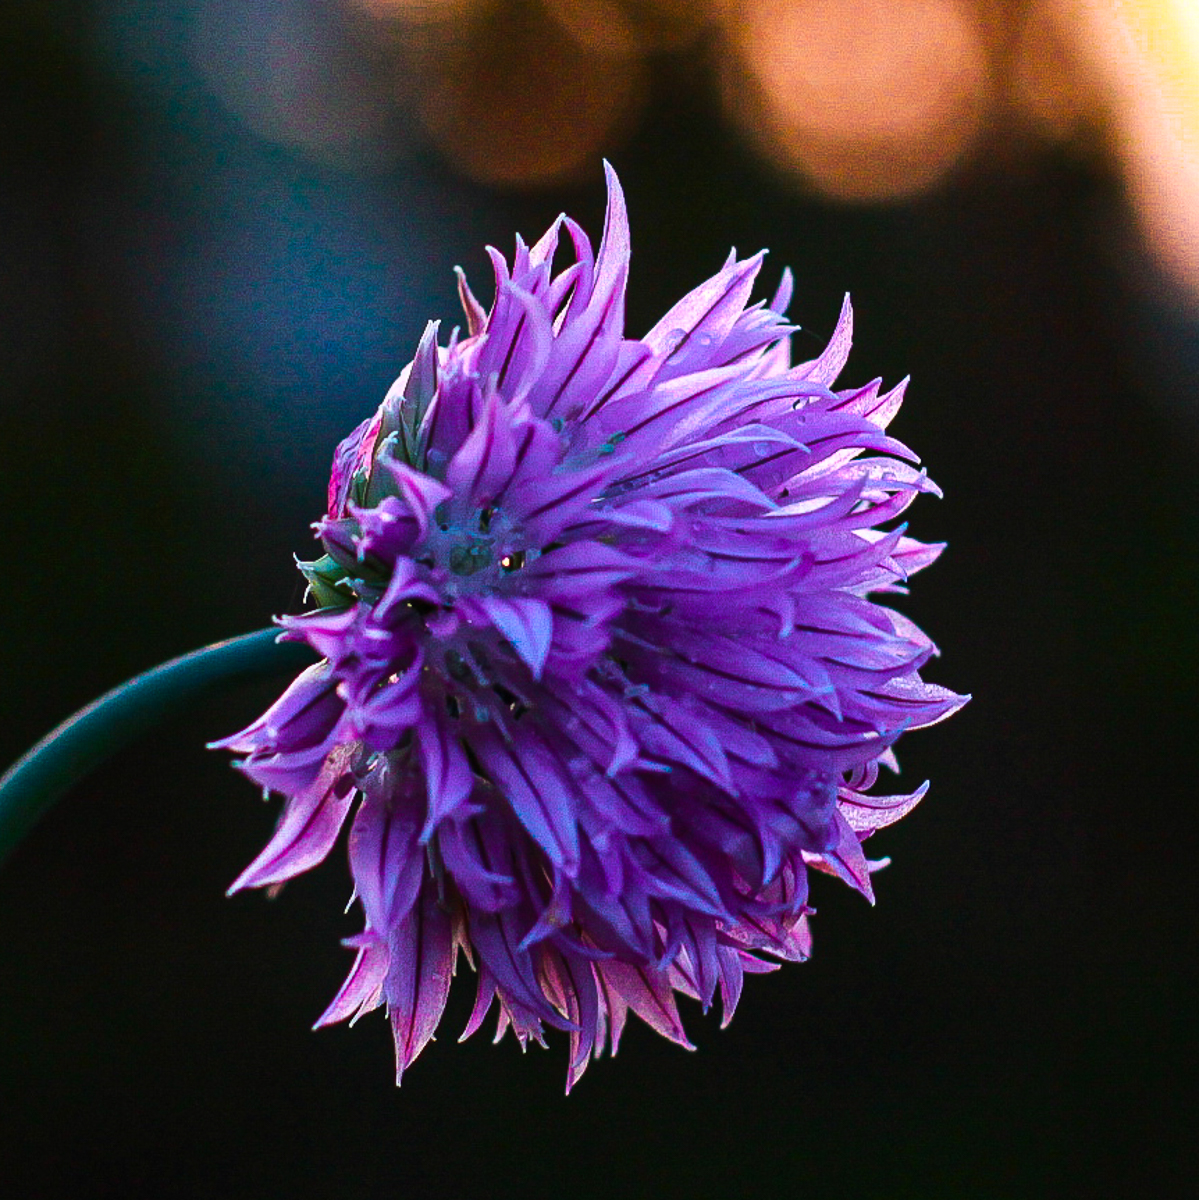 Close up of one purple allium flower with fading orange light and dark shadows behind.